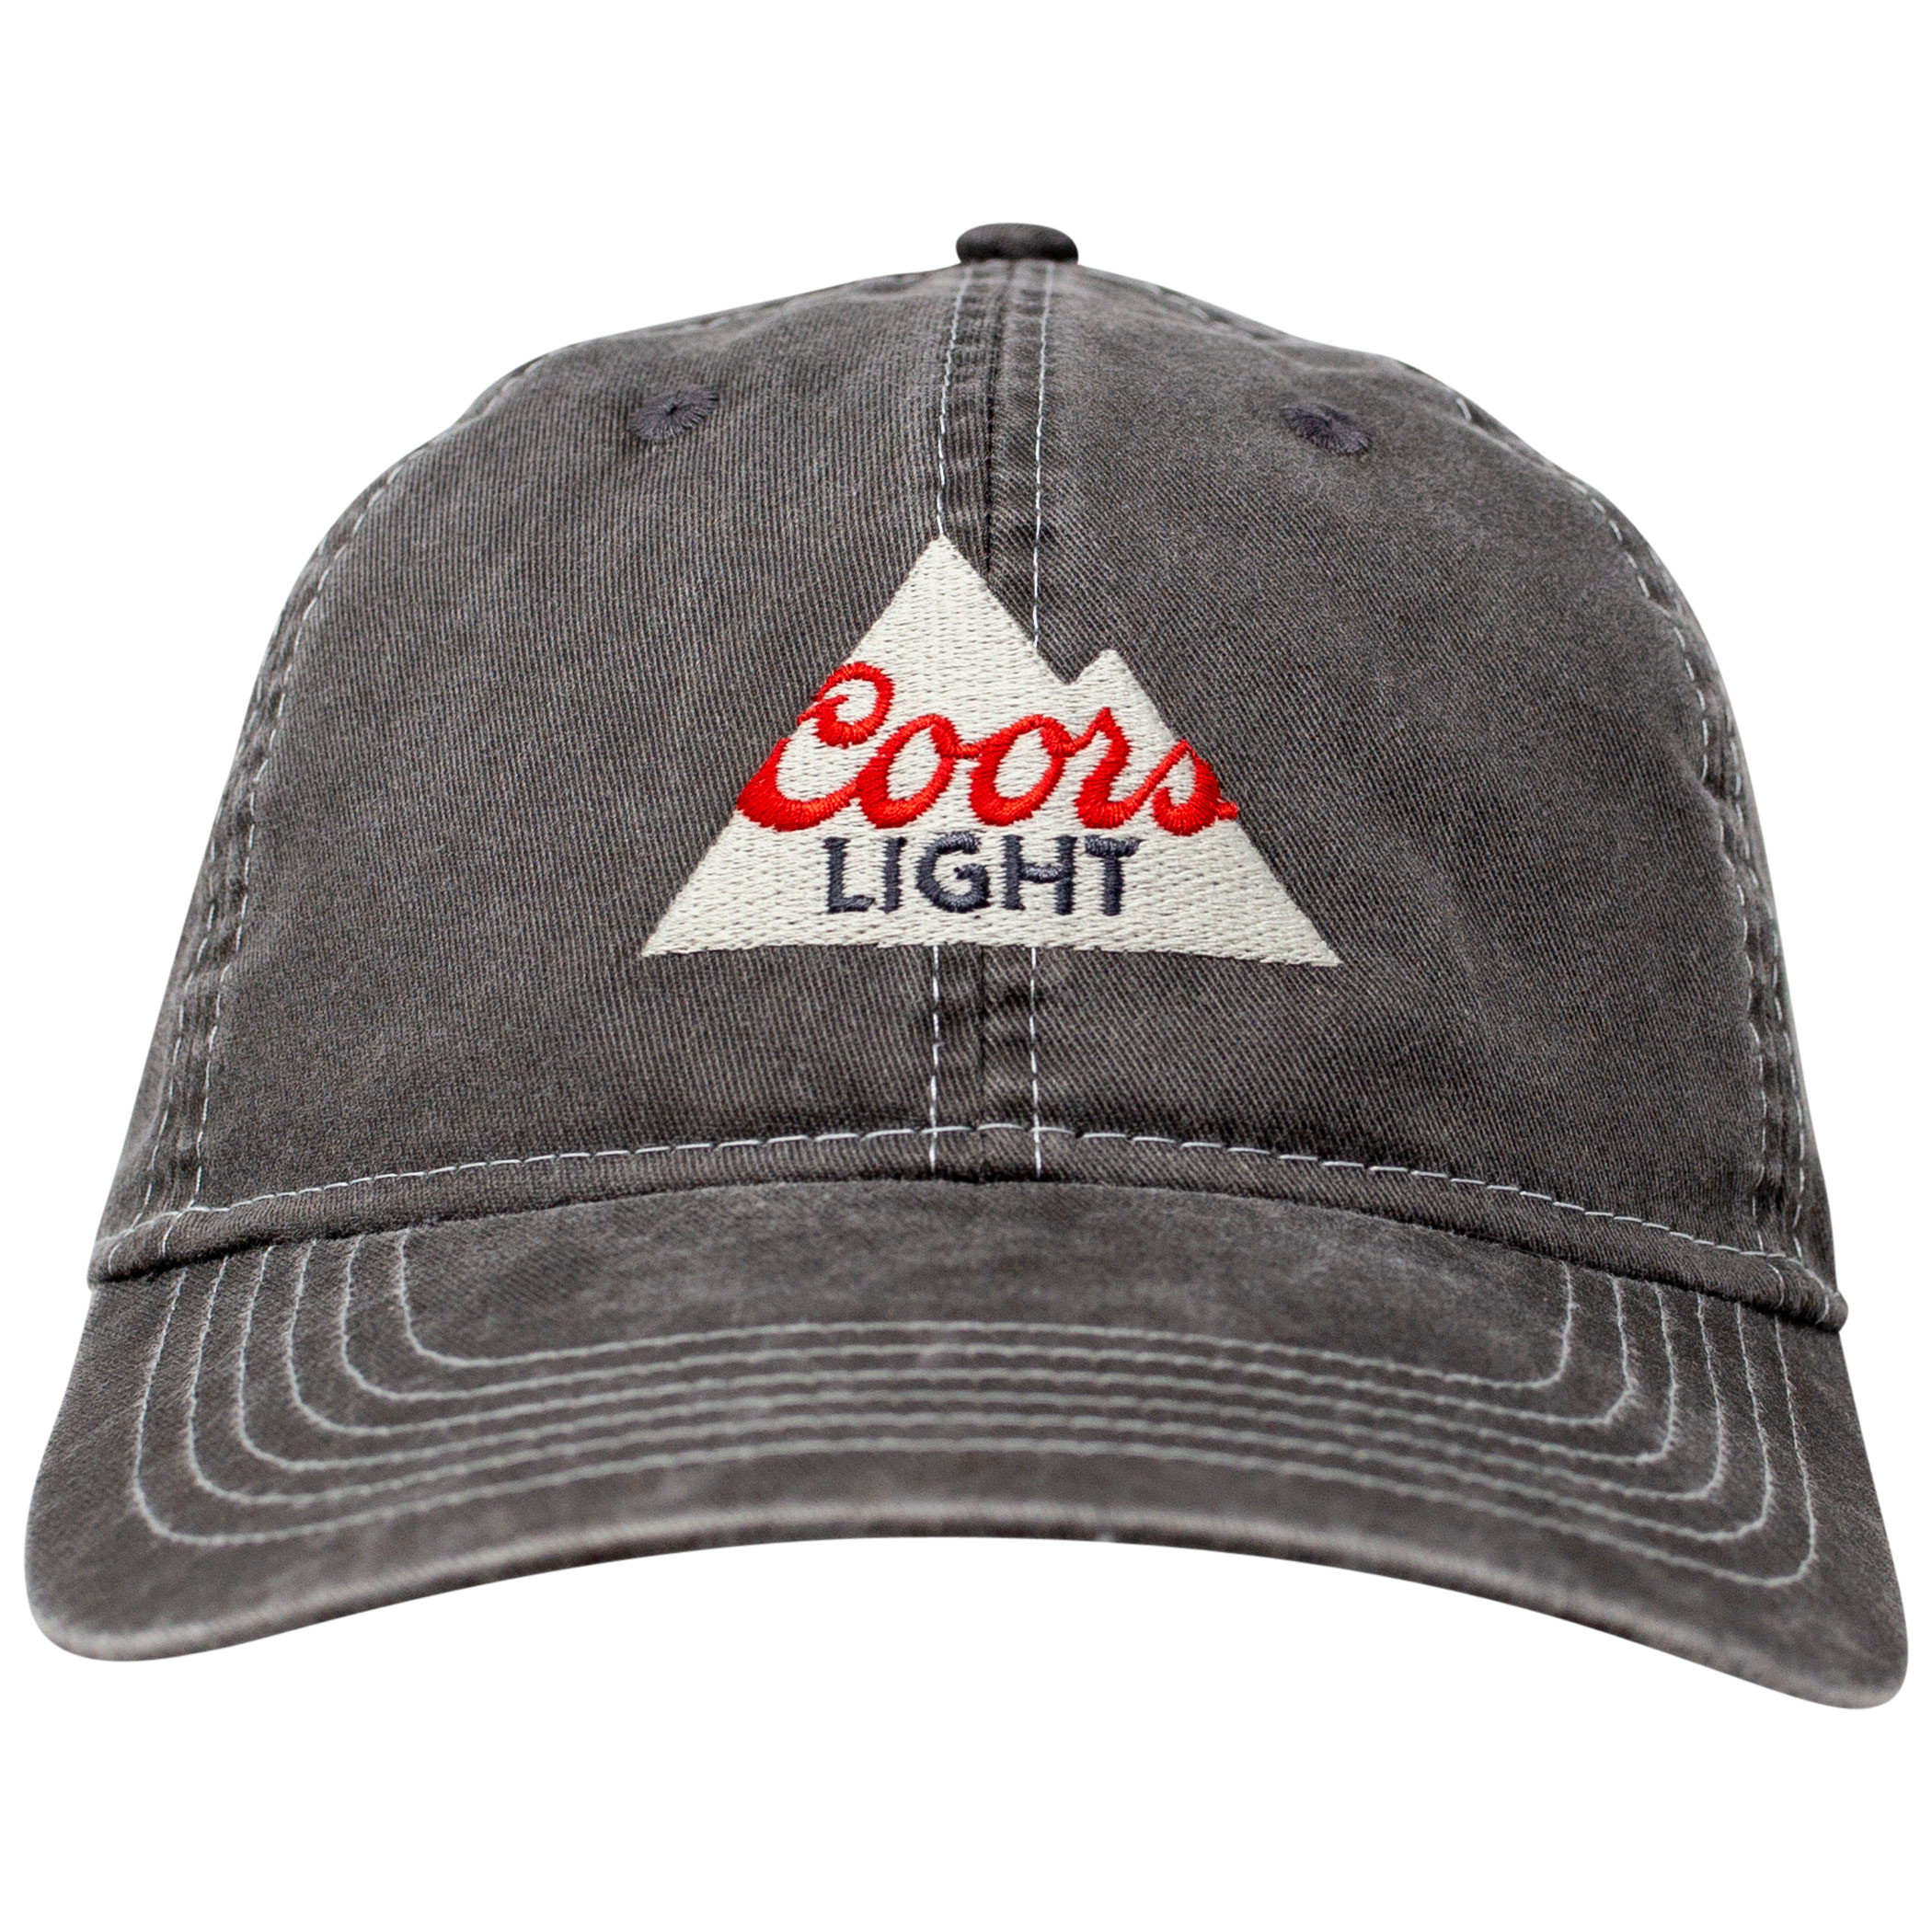 One Size Grey 686 Mens Coors Light Hat 